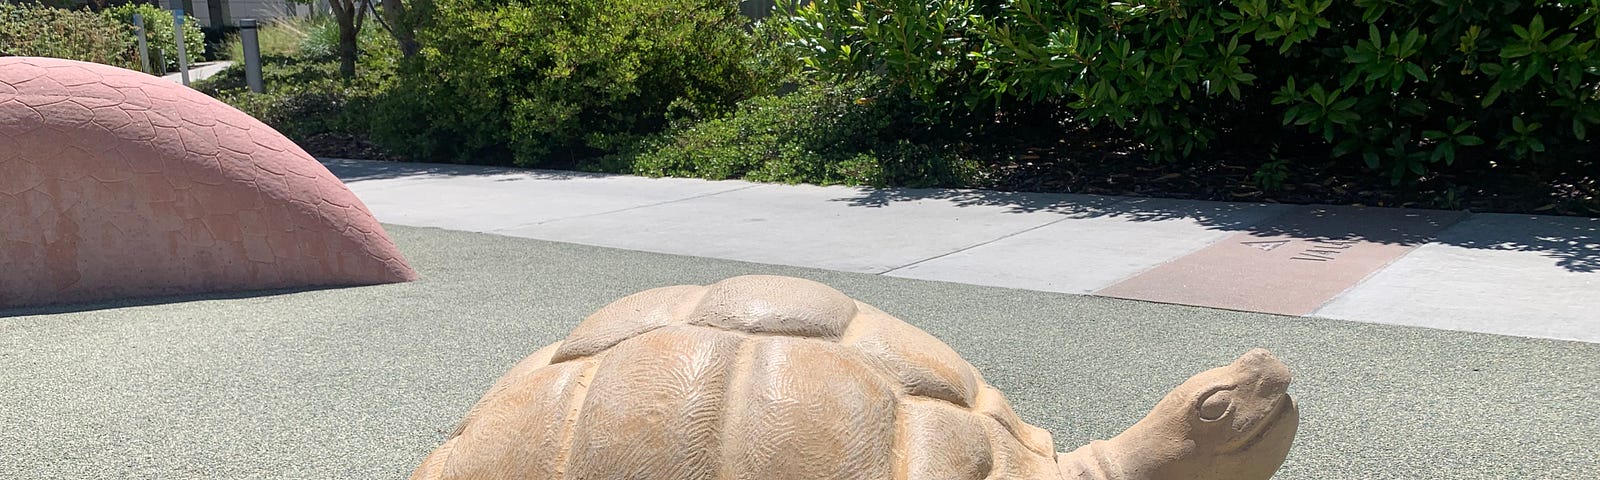 A tan-colored sculpture of a turtle proudly occupies its own path.